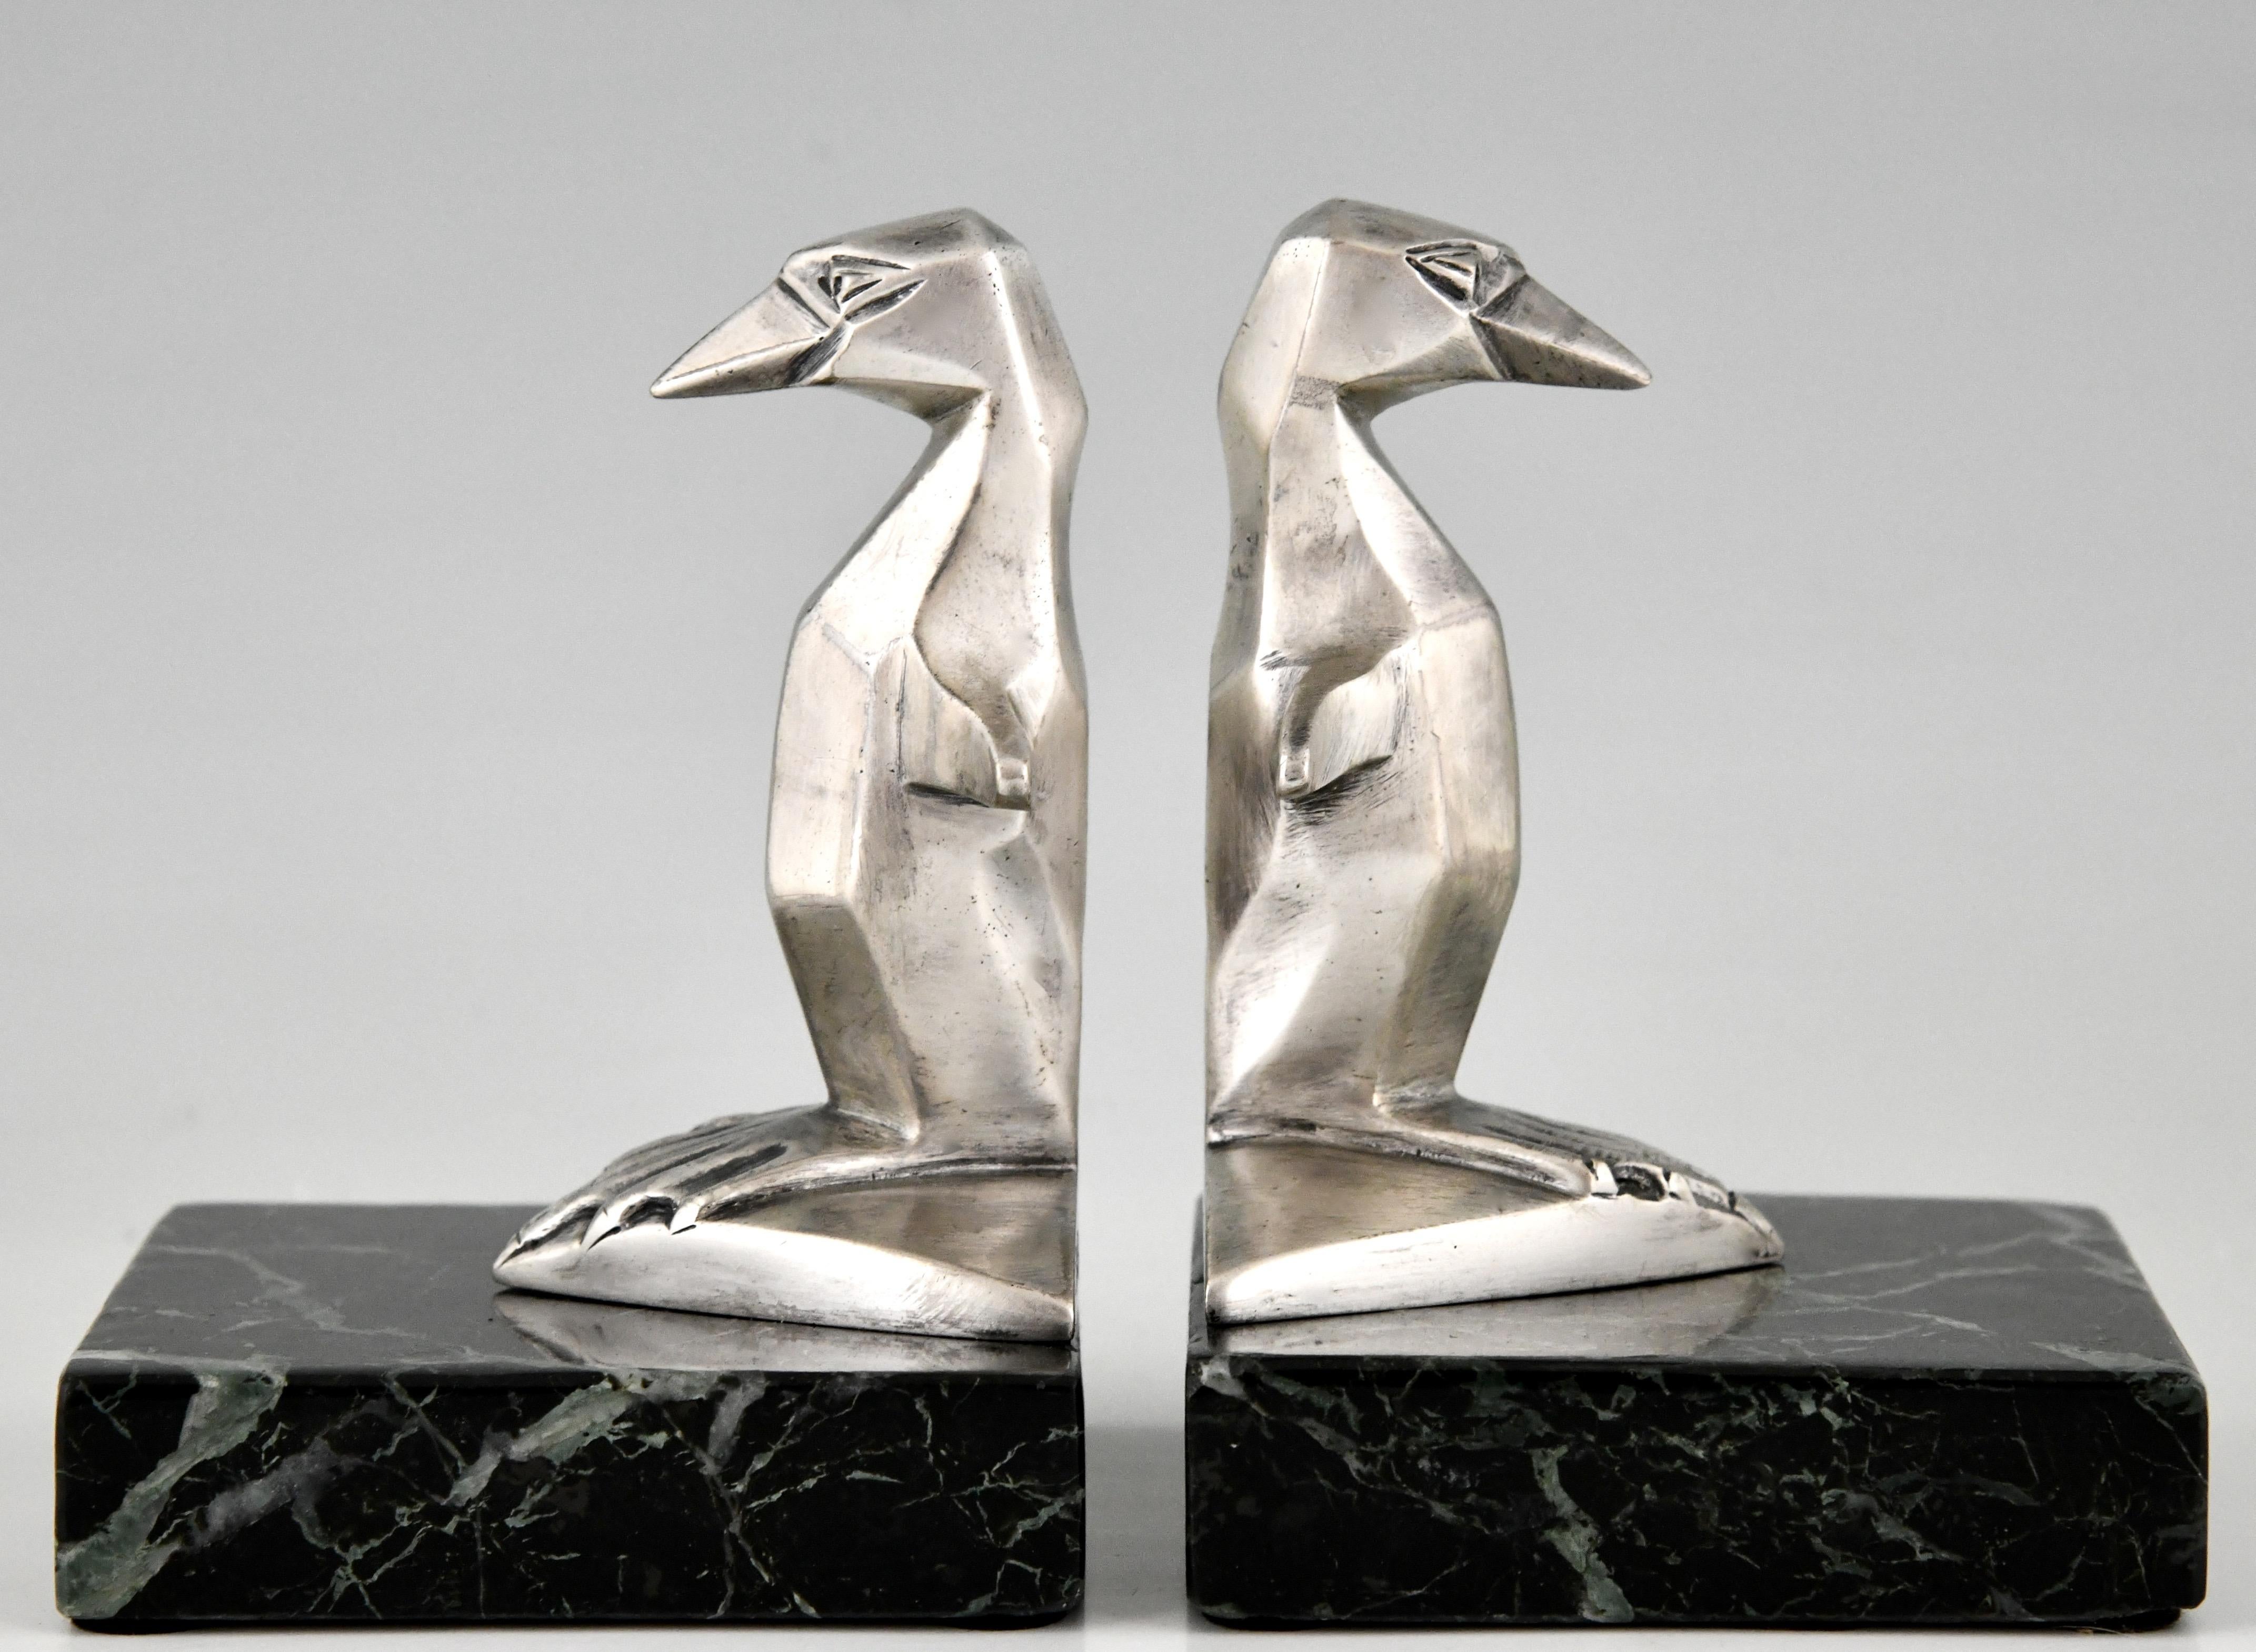 Art Deco silvered bronze bookends with penguins on marble bases. 
Signed by Gaston H Bourcart. France 1930.
Literature:
“Mascottes passion” by Michel Legrand, Antic show éditions. ?“Mascottes automobiles” by Michel Legrand, EPA éditions. ?